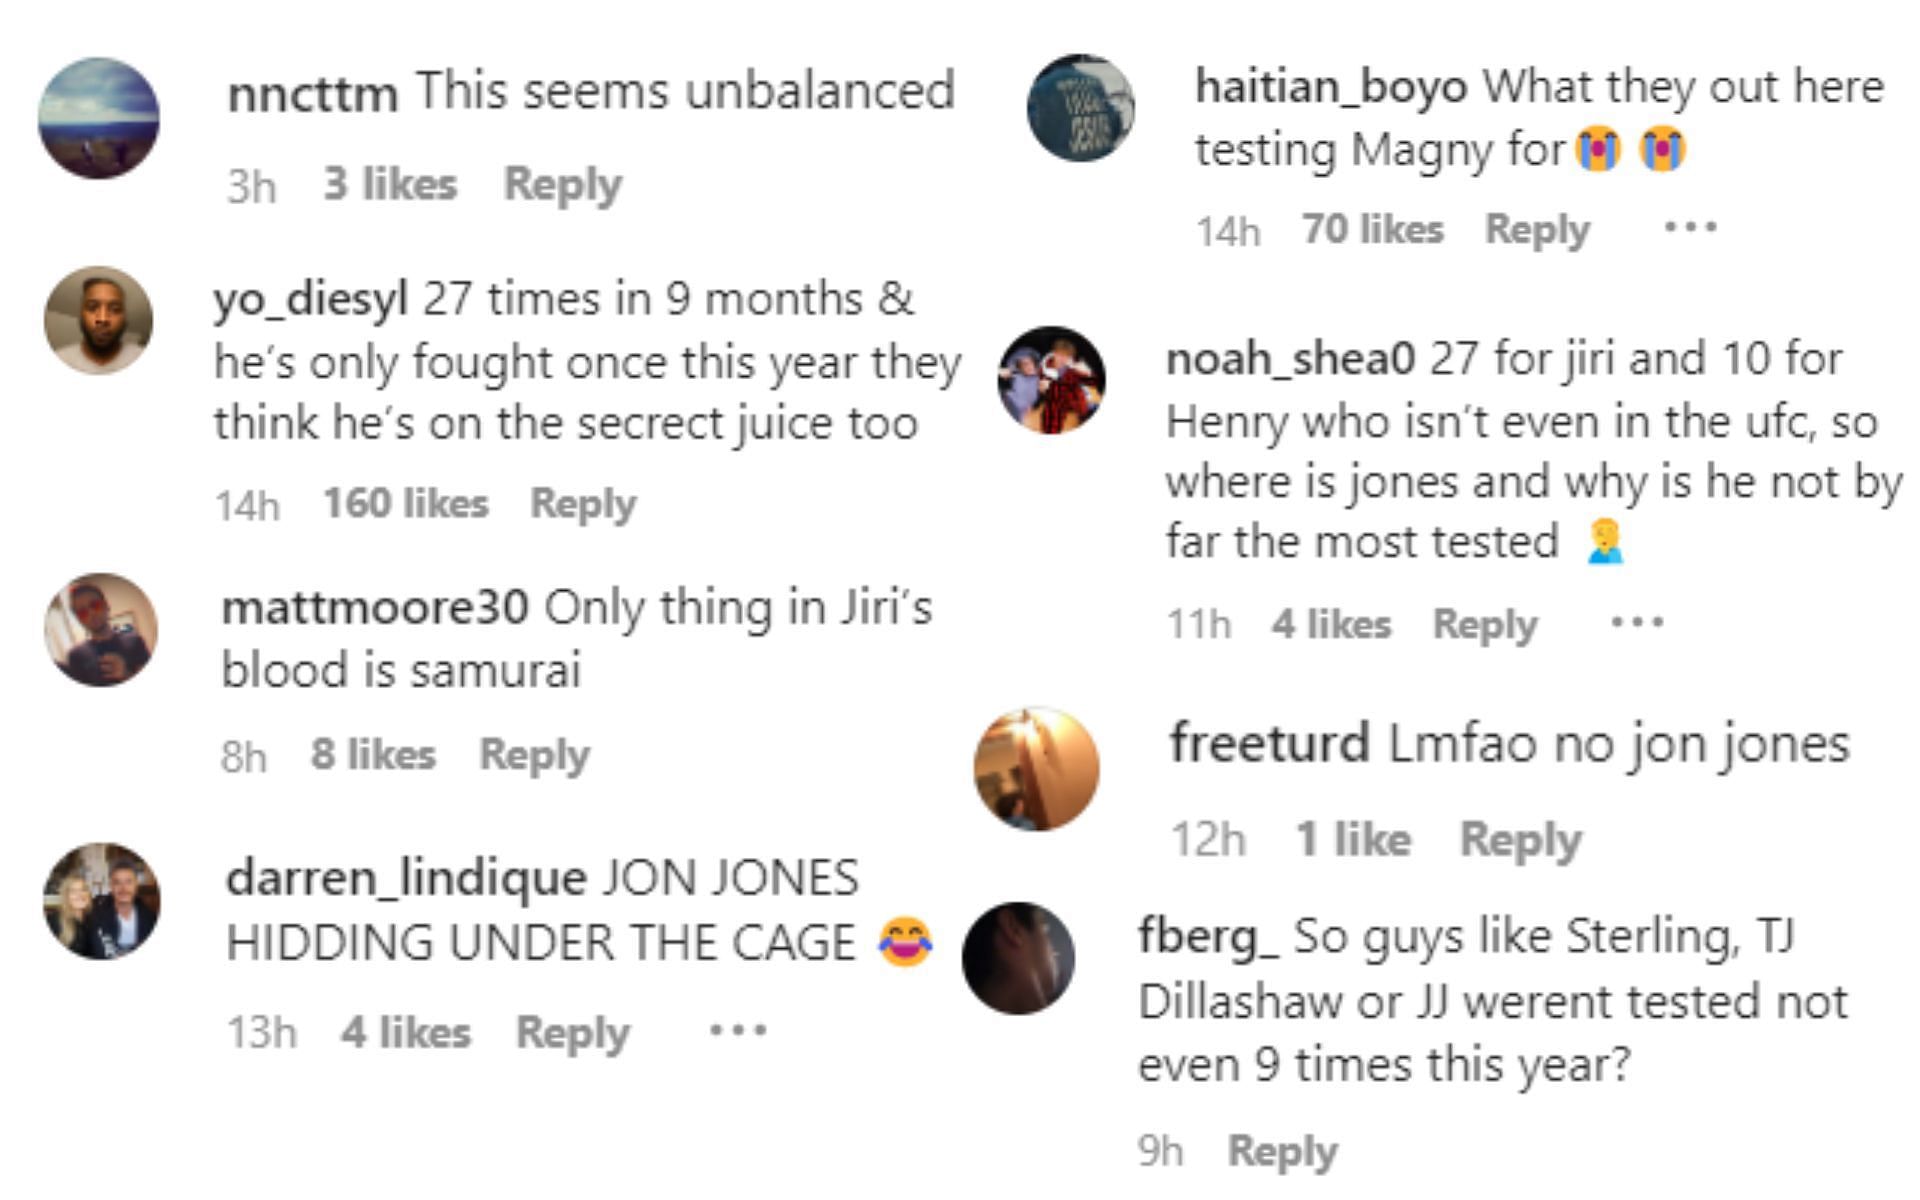 Comments by fans on recent USADA update